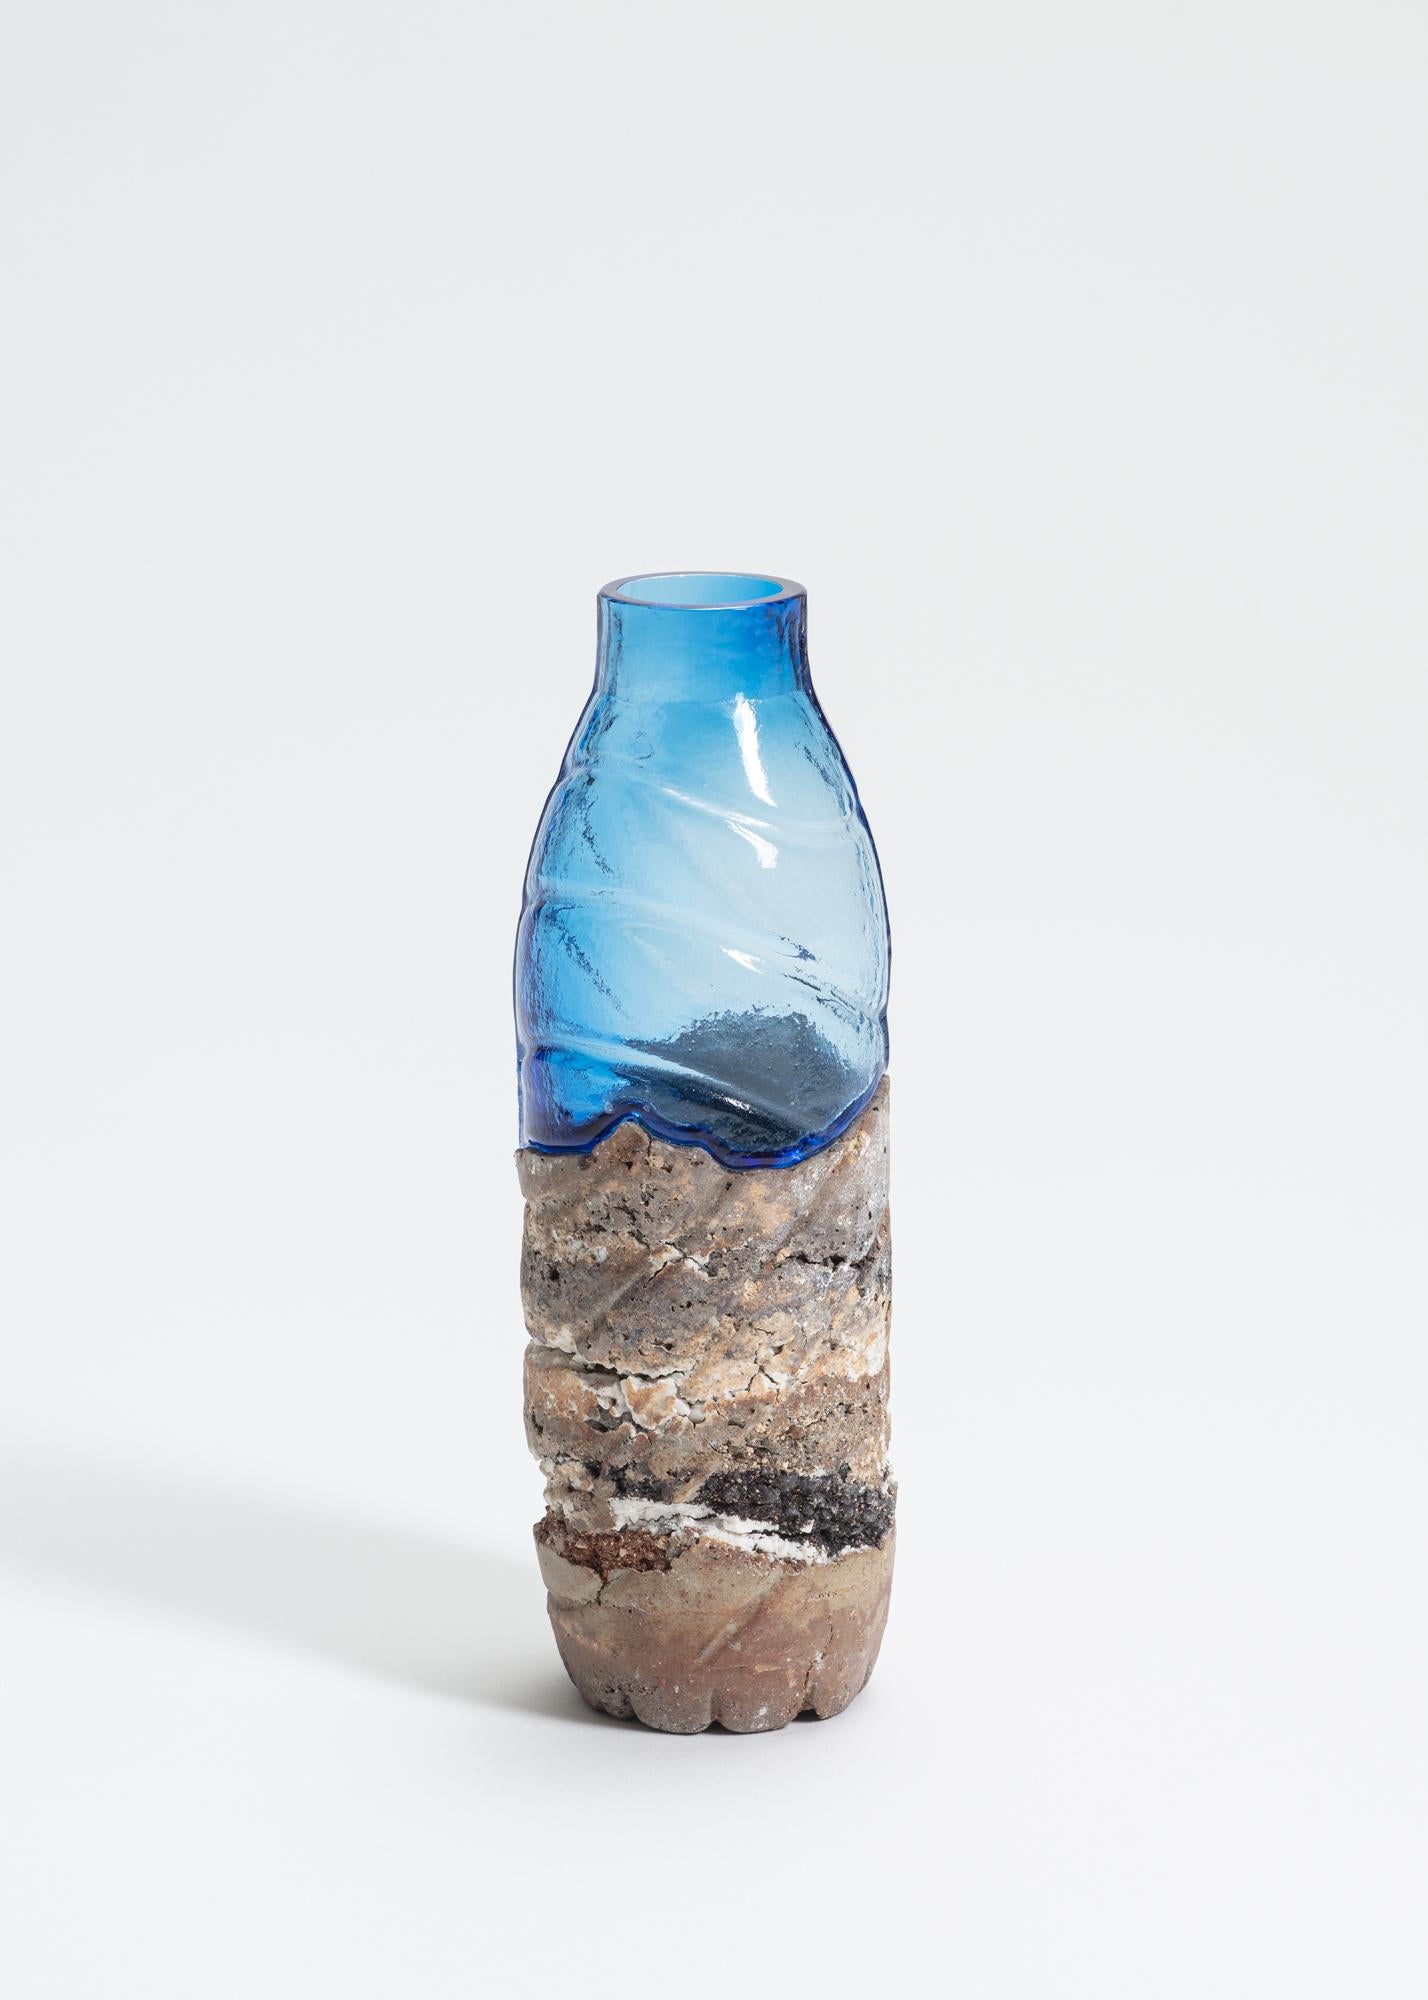 FUWA FUWA, No 14 Bottle by Yusuke´ Y. Offhause
One of a Kind, the work is in two parts (ceramic and glass).
Dimensions: D 7.8 x W 7.8 x H 22 cm.
Materials: stoneware, porcelain, glass.

Yusuke´ Y. Offhause:
